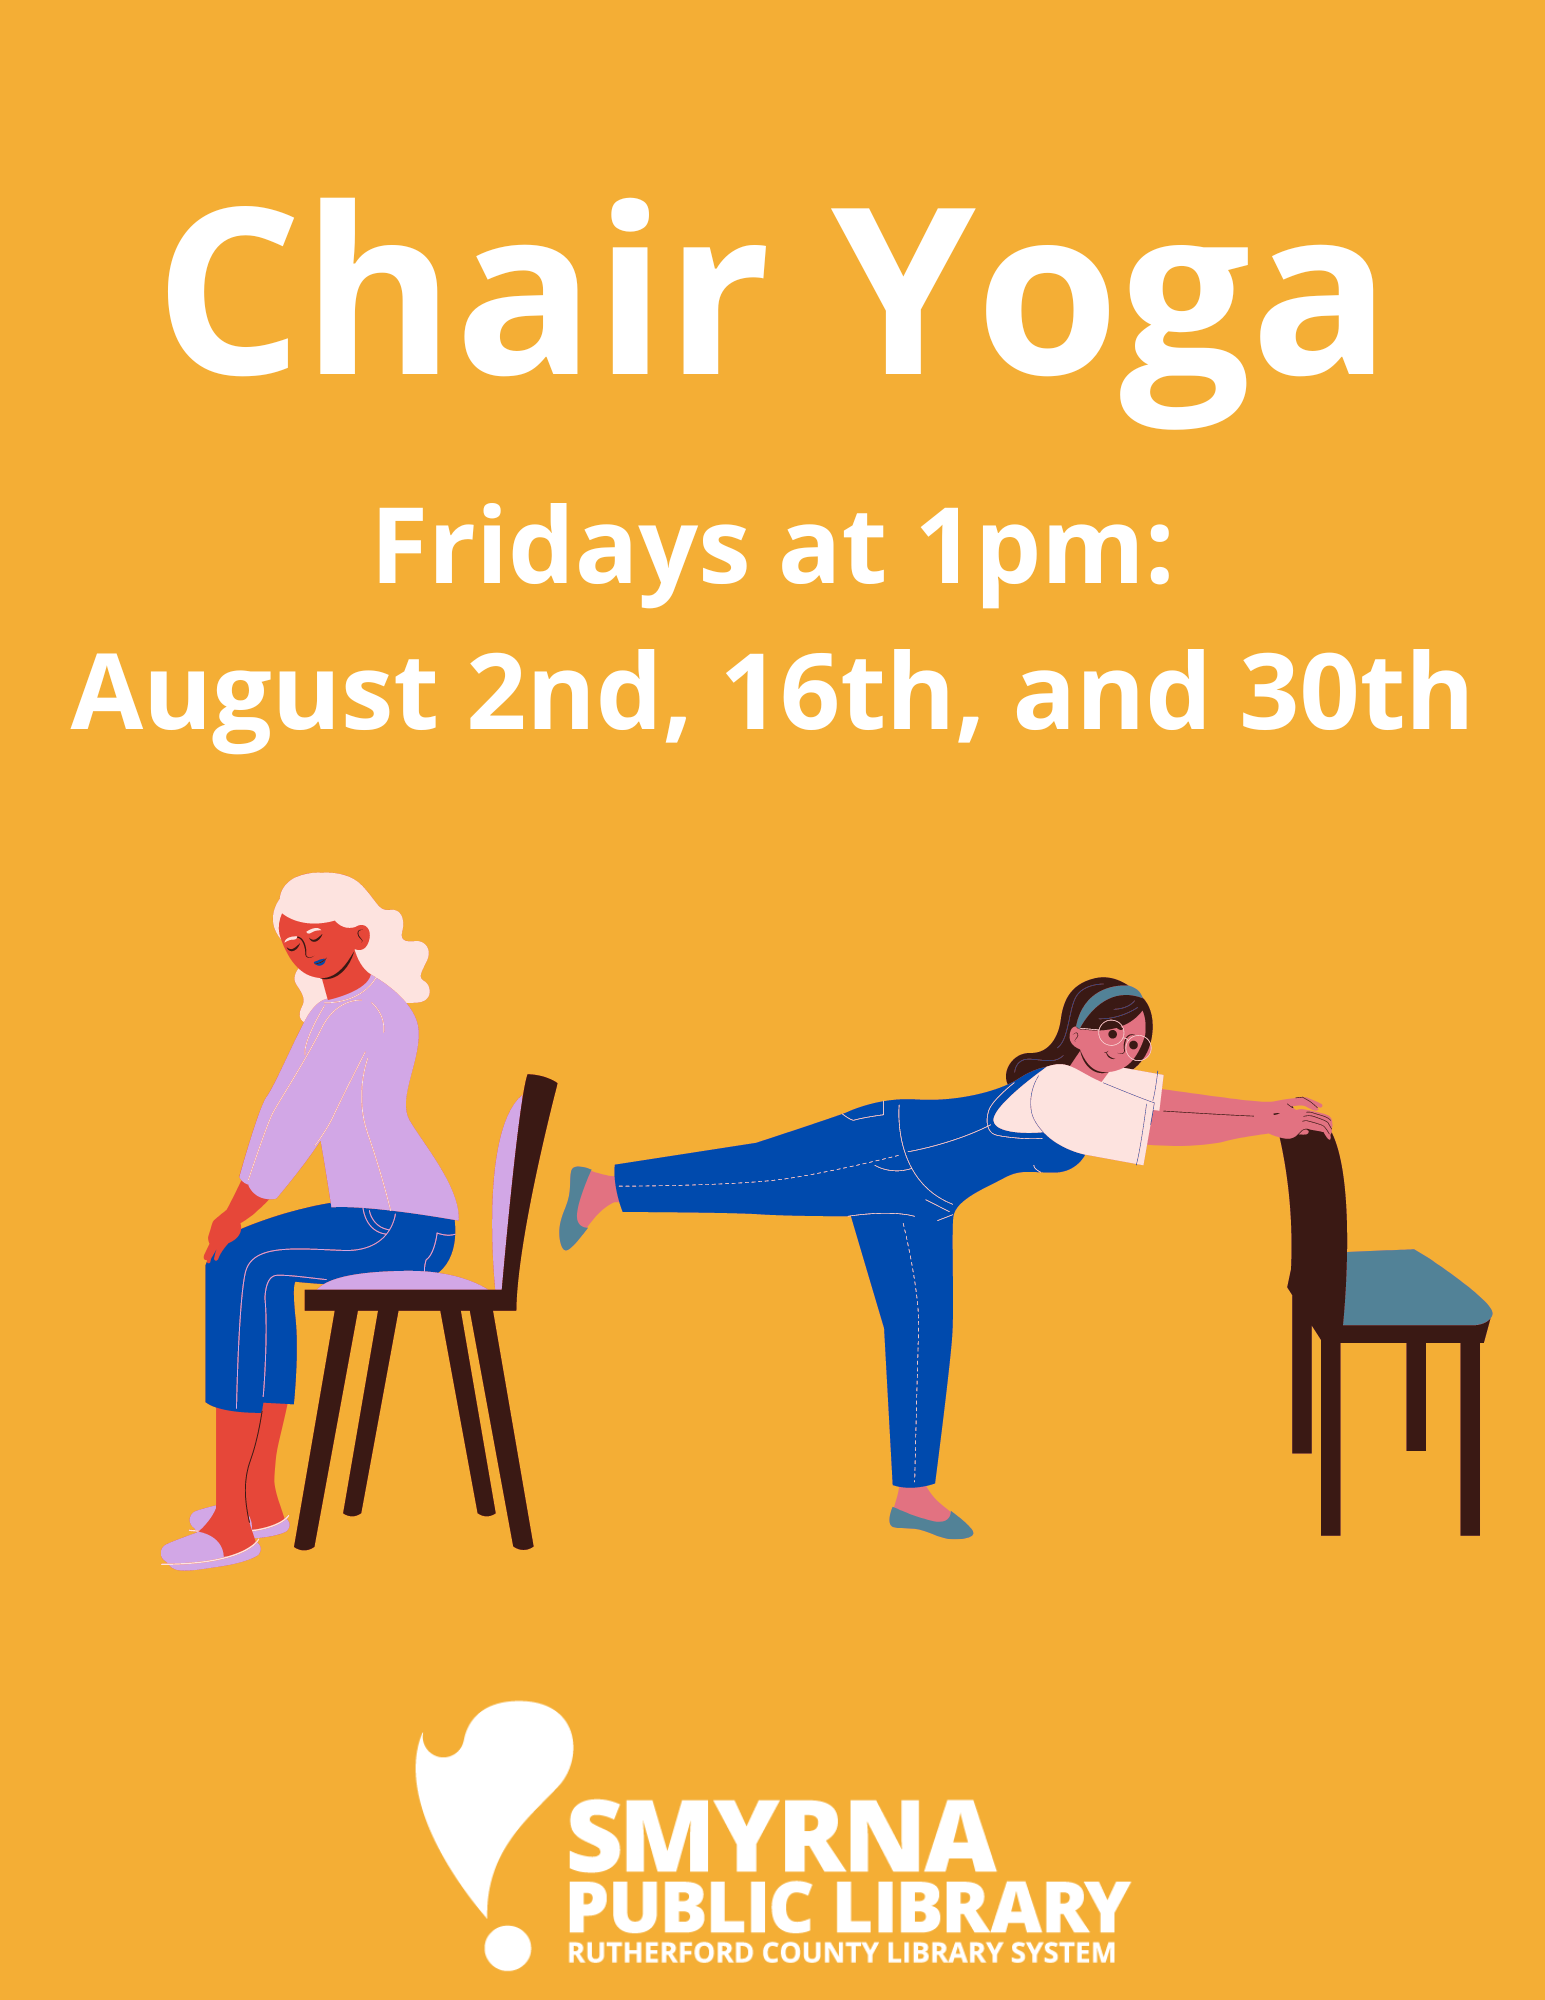 Chair Yoga at Smyrna Public Library, Fridays August 2, August 16, and August 30 at 1:00pm